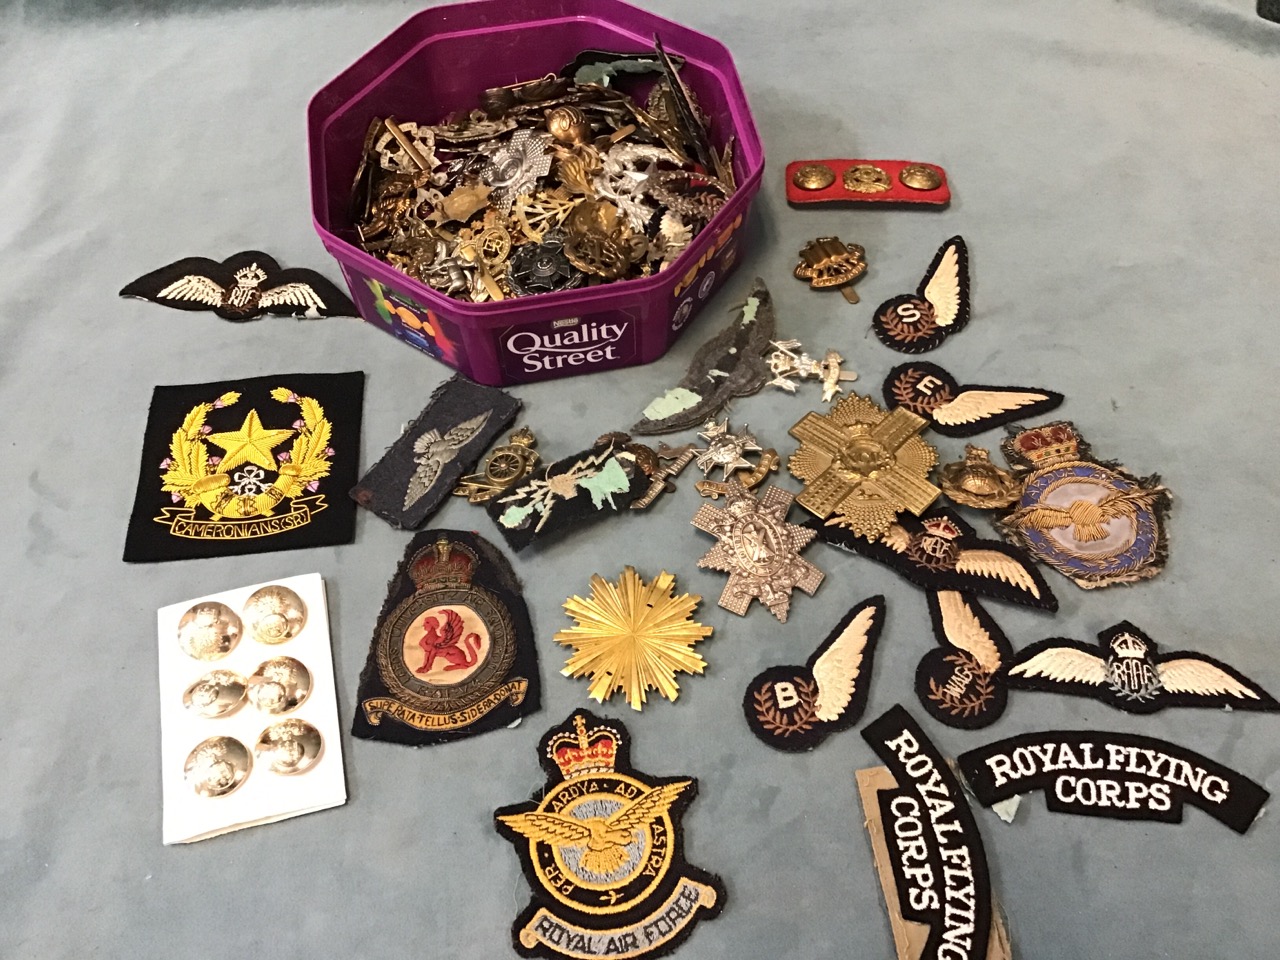 Miscellaneous mainly British militaria - cap badges, embroidered insignia, buttons, numerous